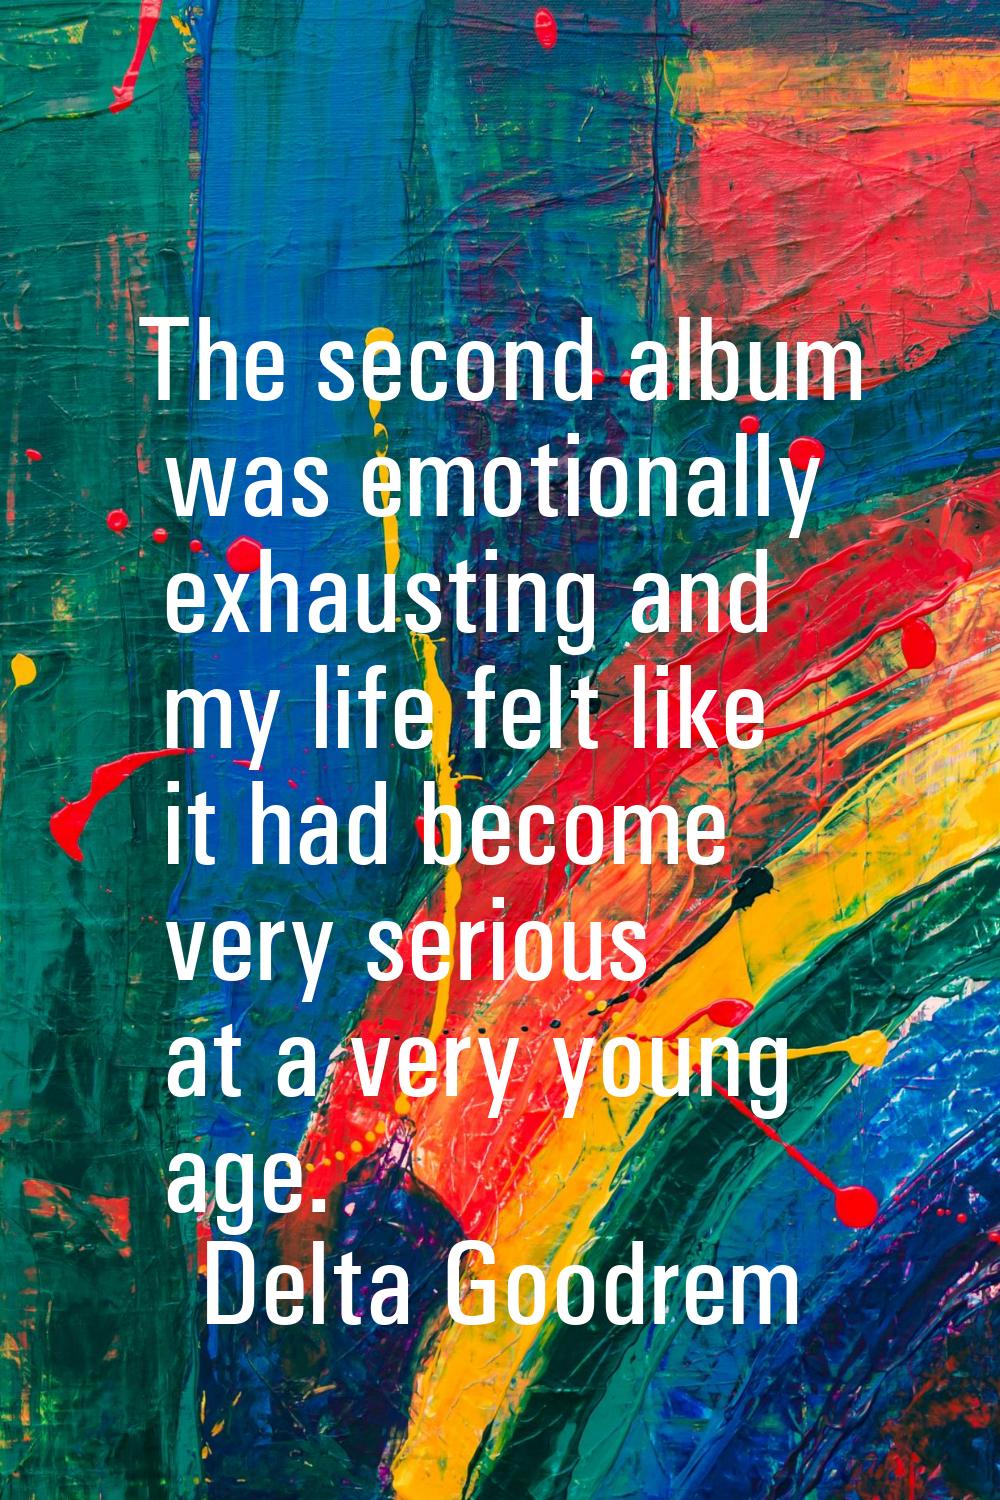 The second album was emotionally exhausting and my life felt like it had become very serious at a v